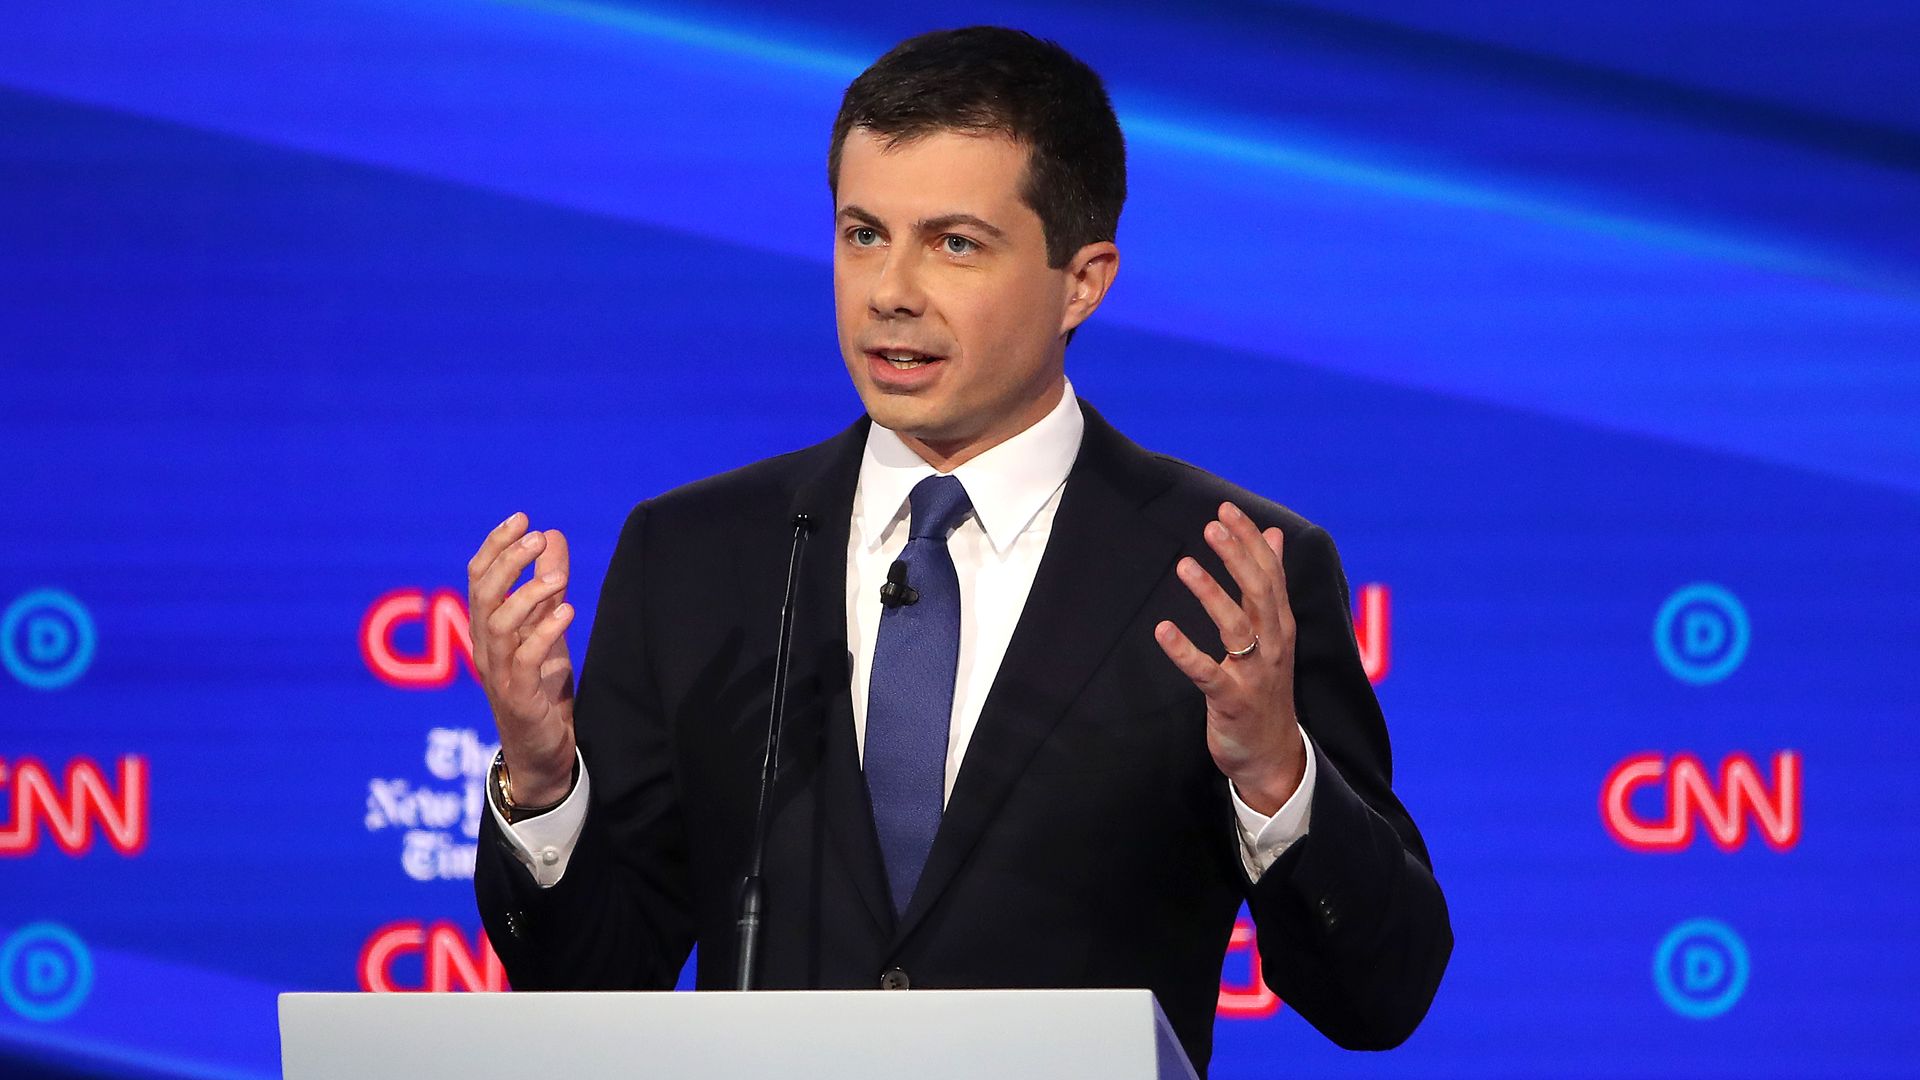 South Bend, Indiana Mayor Pete Buttigieg speaks during the Democratic Presidential Debate at Otterbein University on October 15, 2019 in Westerville, Ohio.